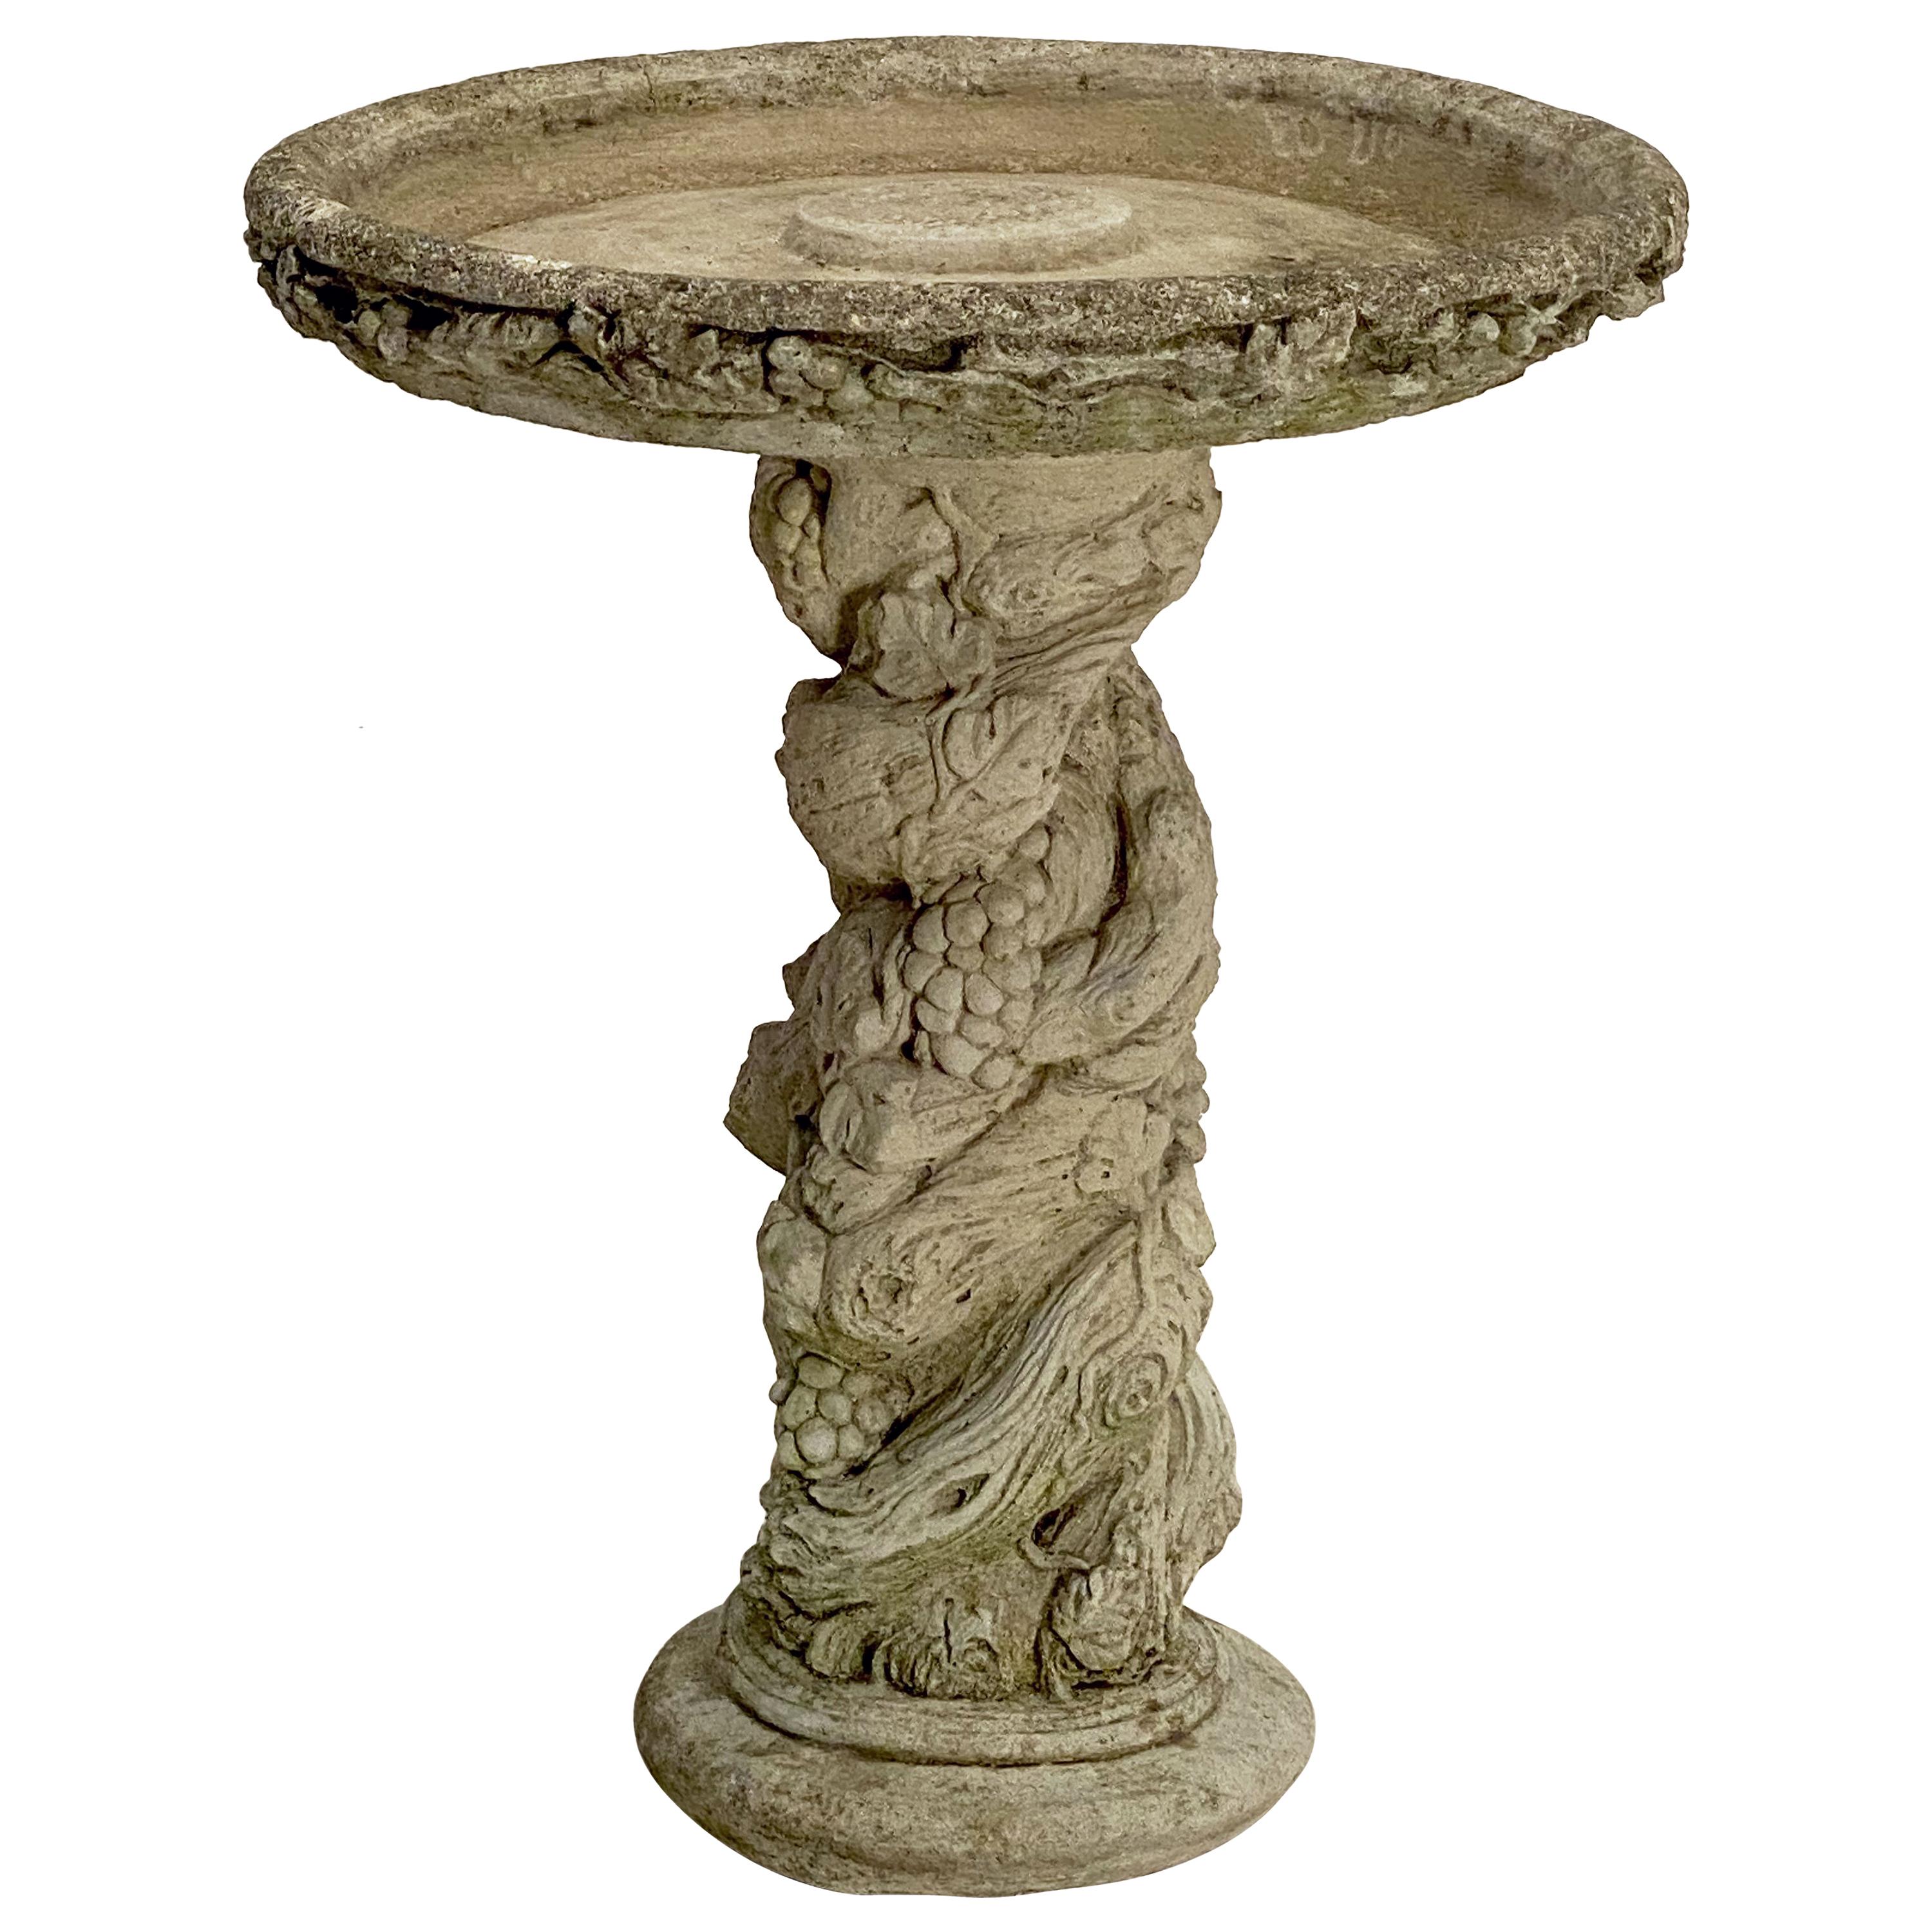 Large English Garden Stone Bird Bath with Faux Bois Relief